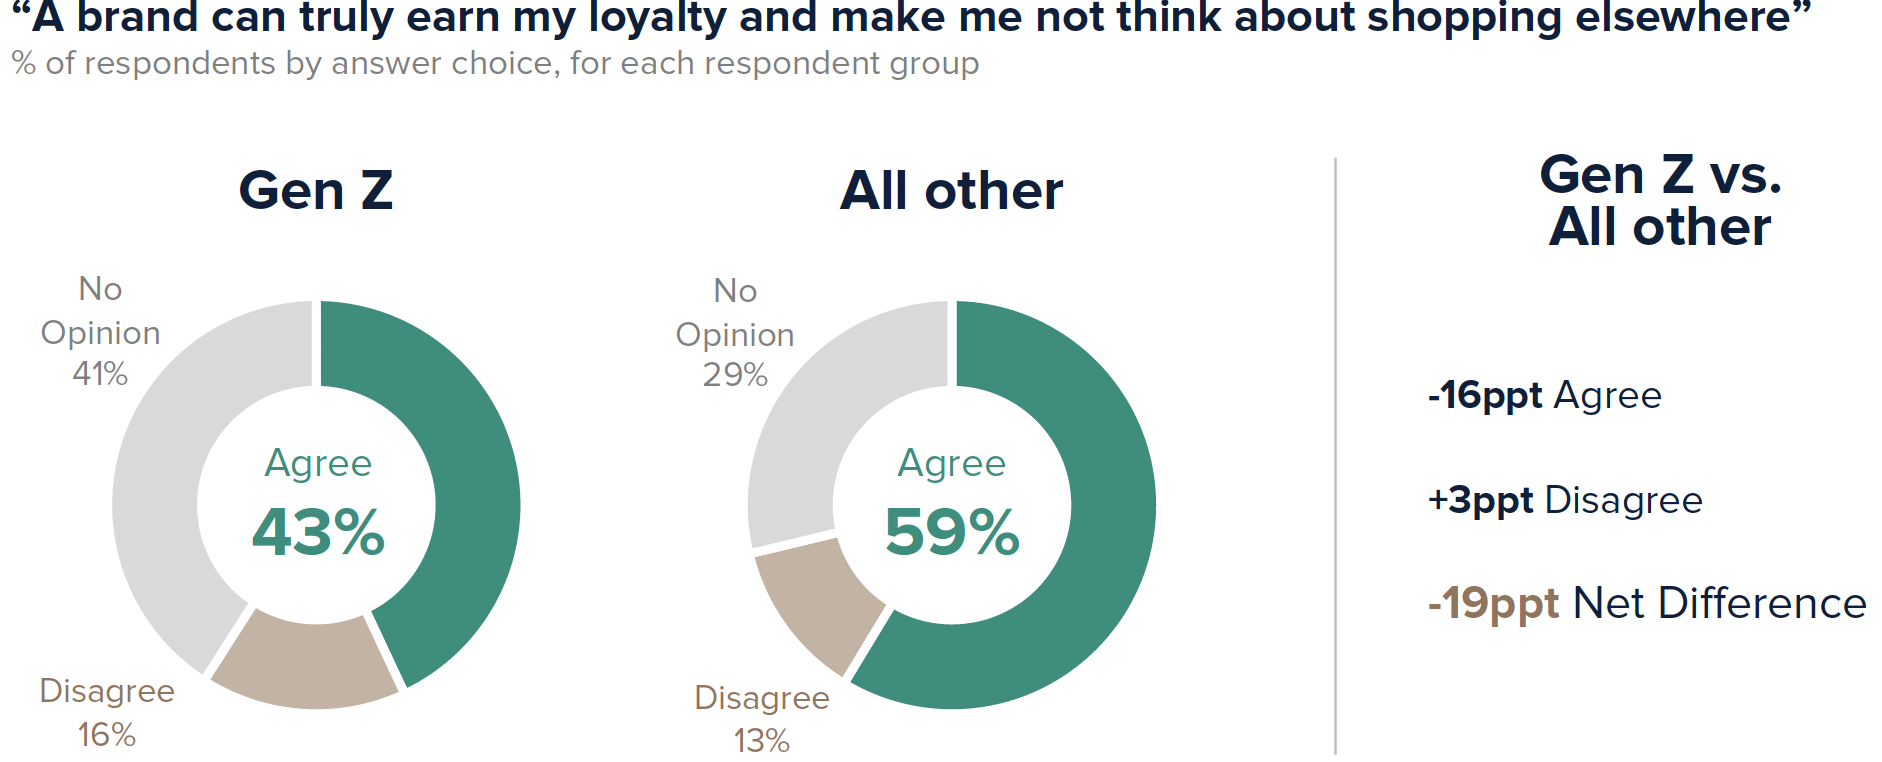 43% of Gen Z agrees that “a brand can truly earn my loyalty and make me not think about shopping elsewhere”